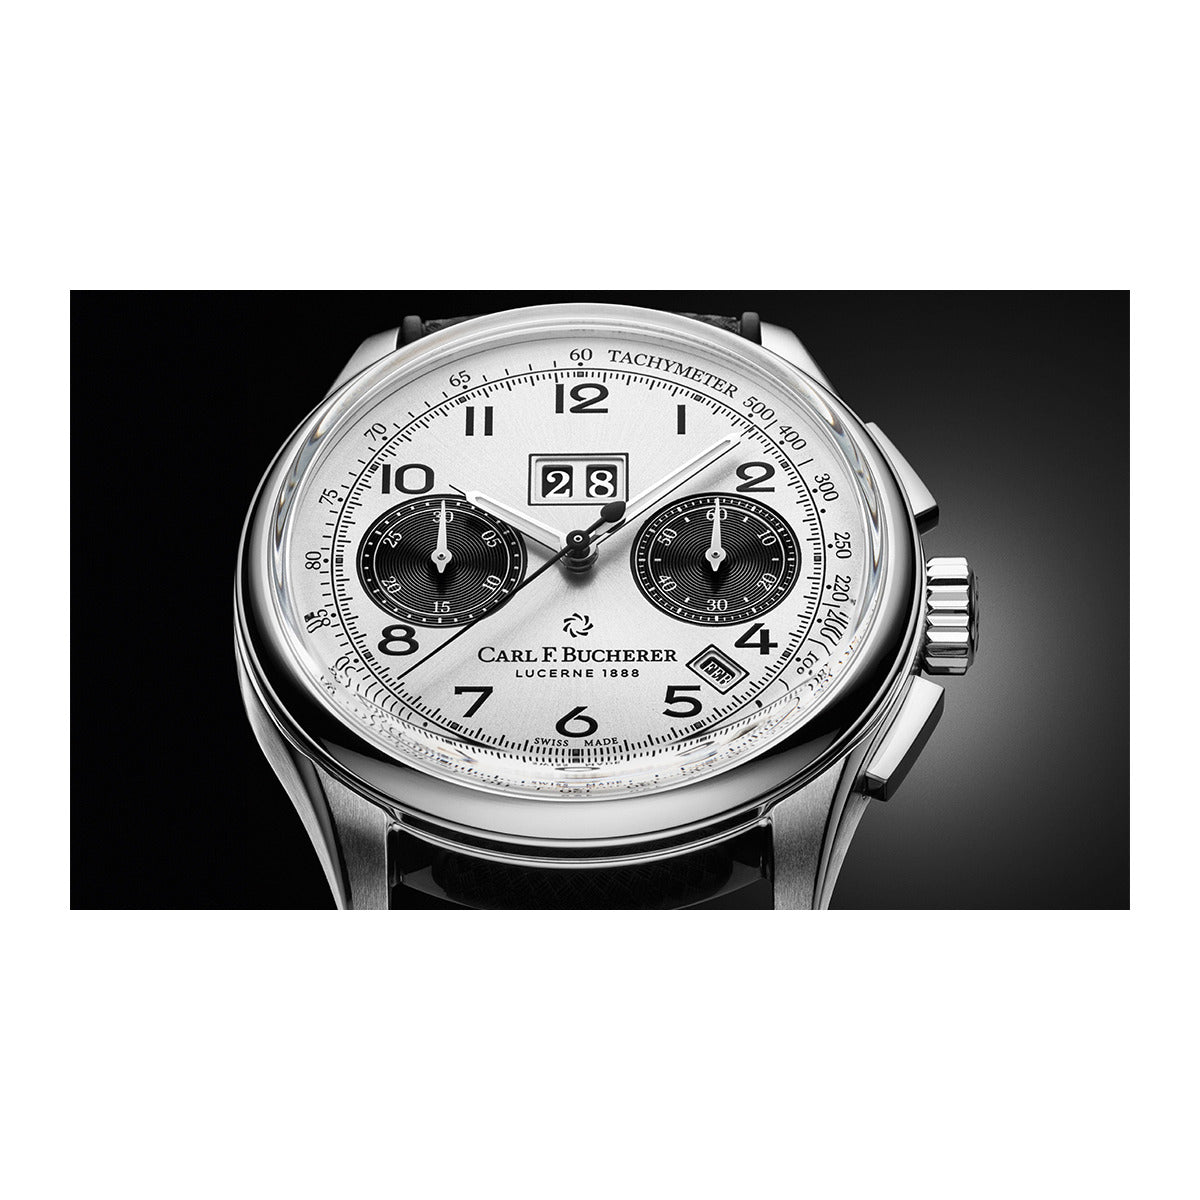 Carl F. Bucherer Haritage Annual calendar Chronograph Stainless steel Limited Edition Men's Watch